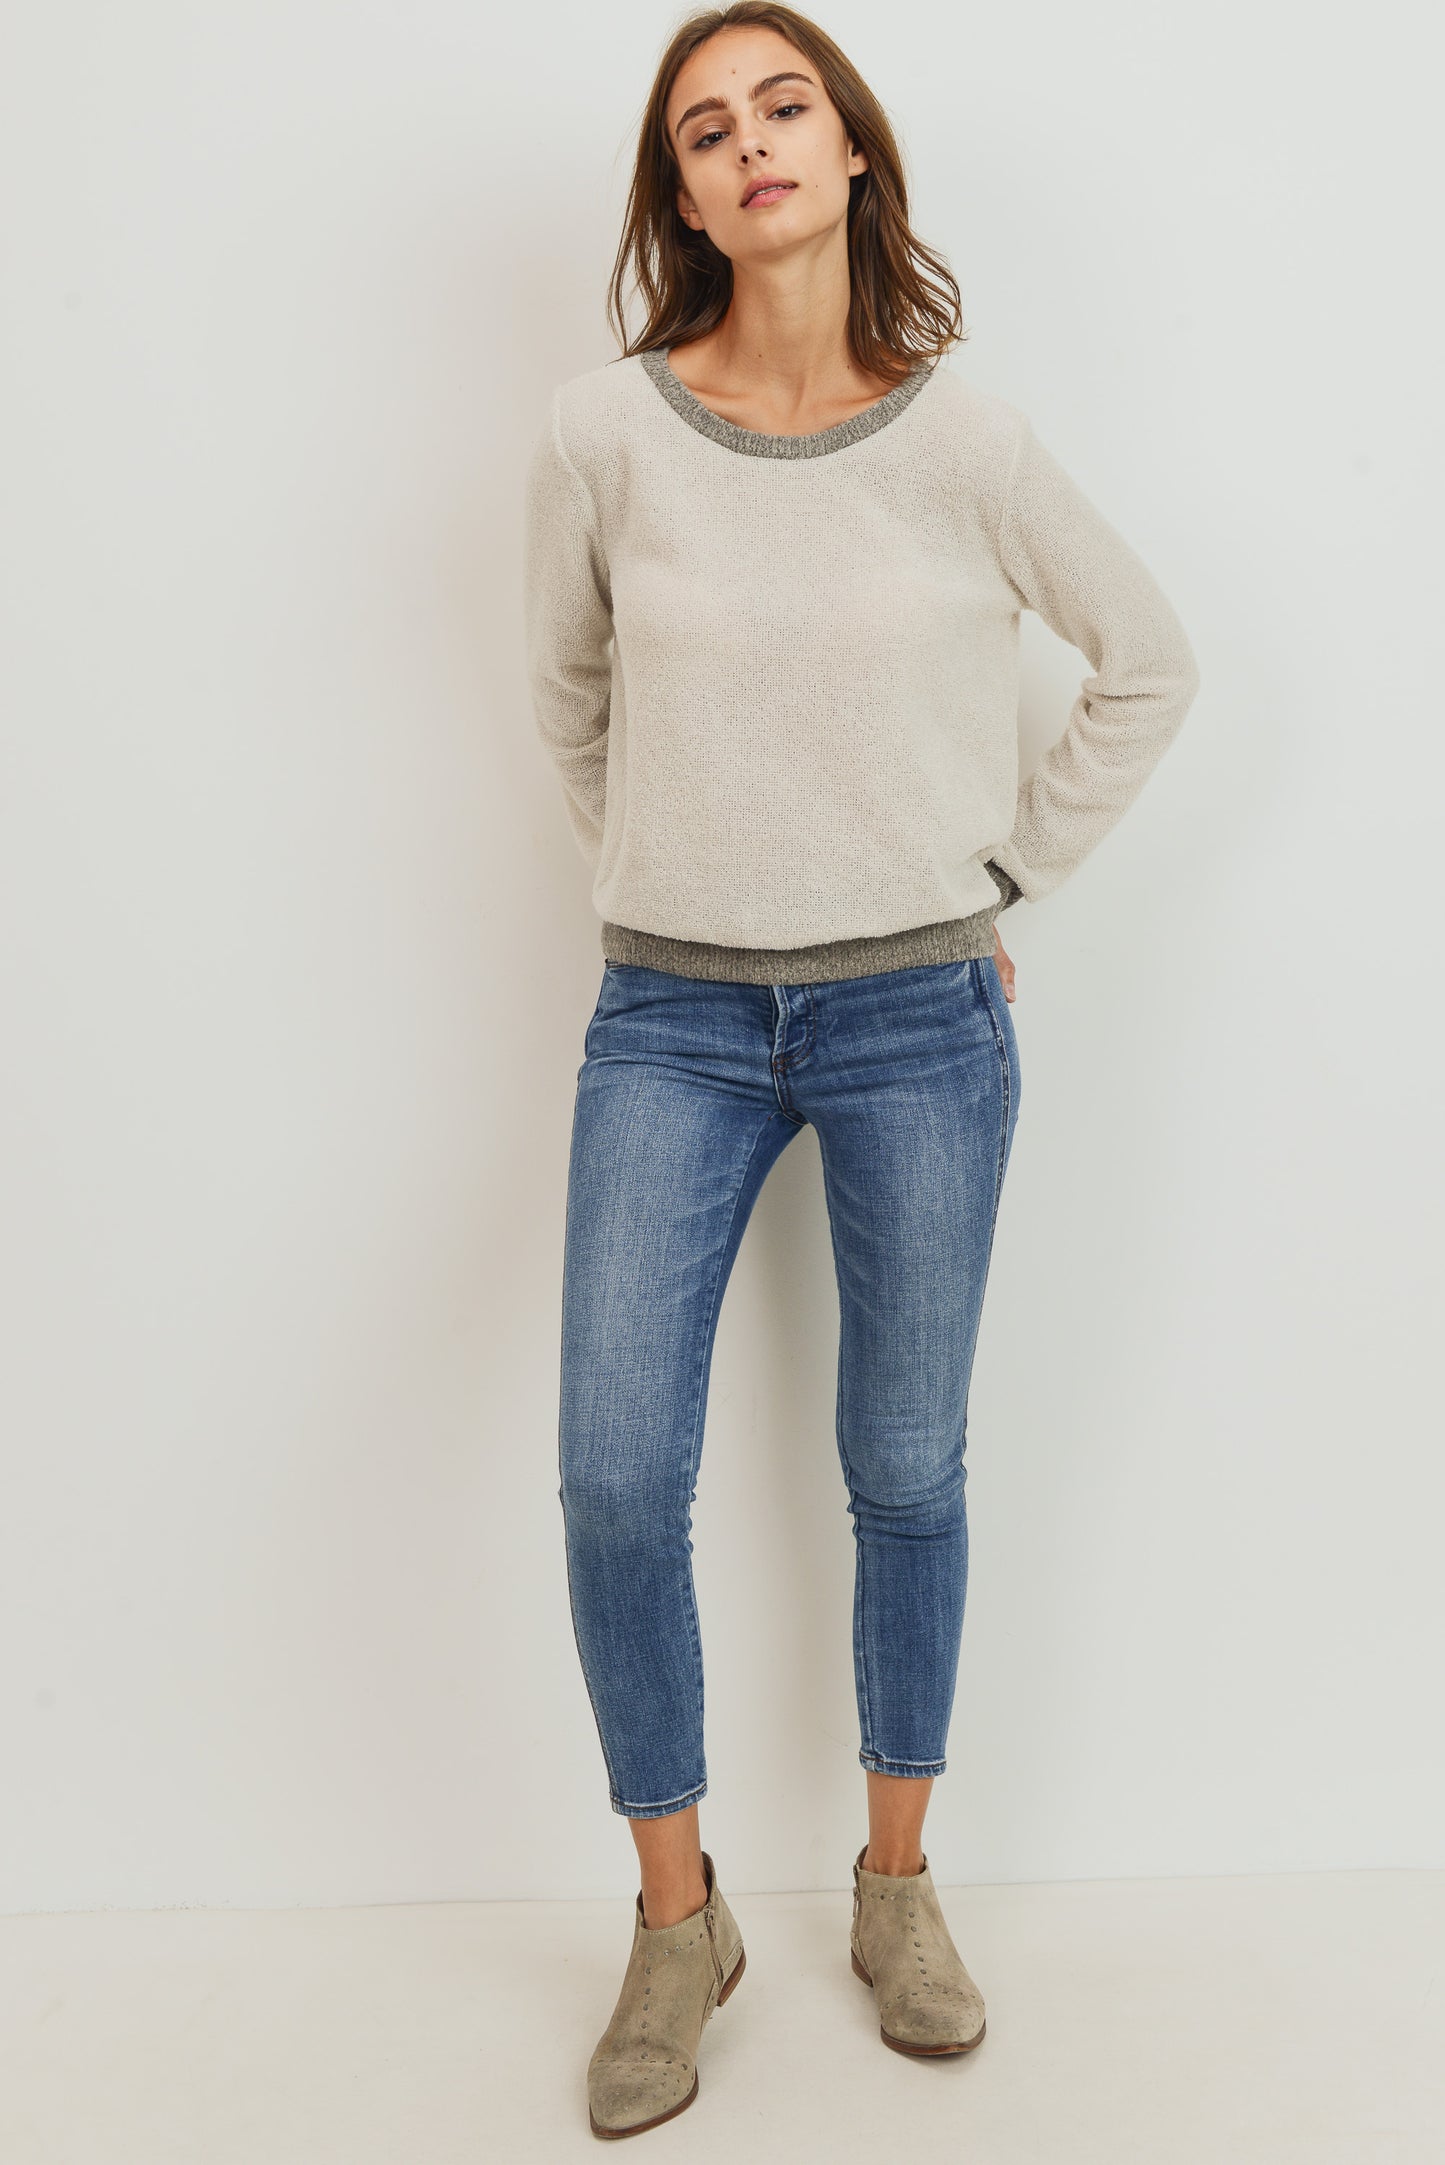 Textured Knit Long Sleeve Top With Opened Back !